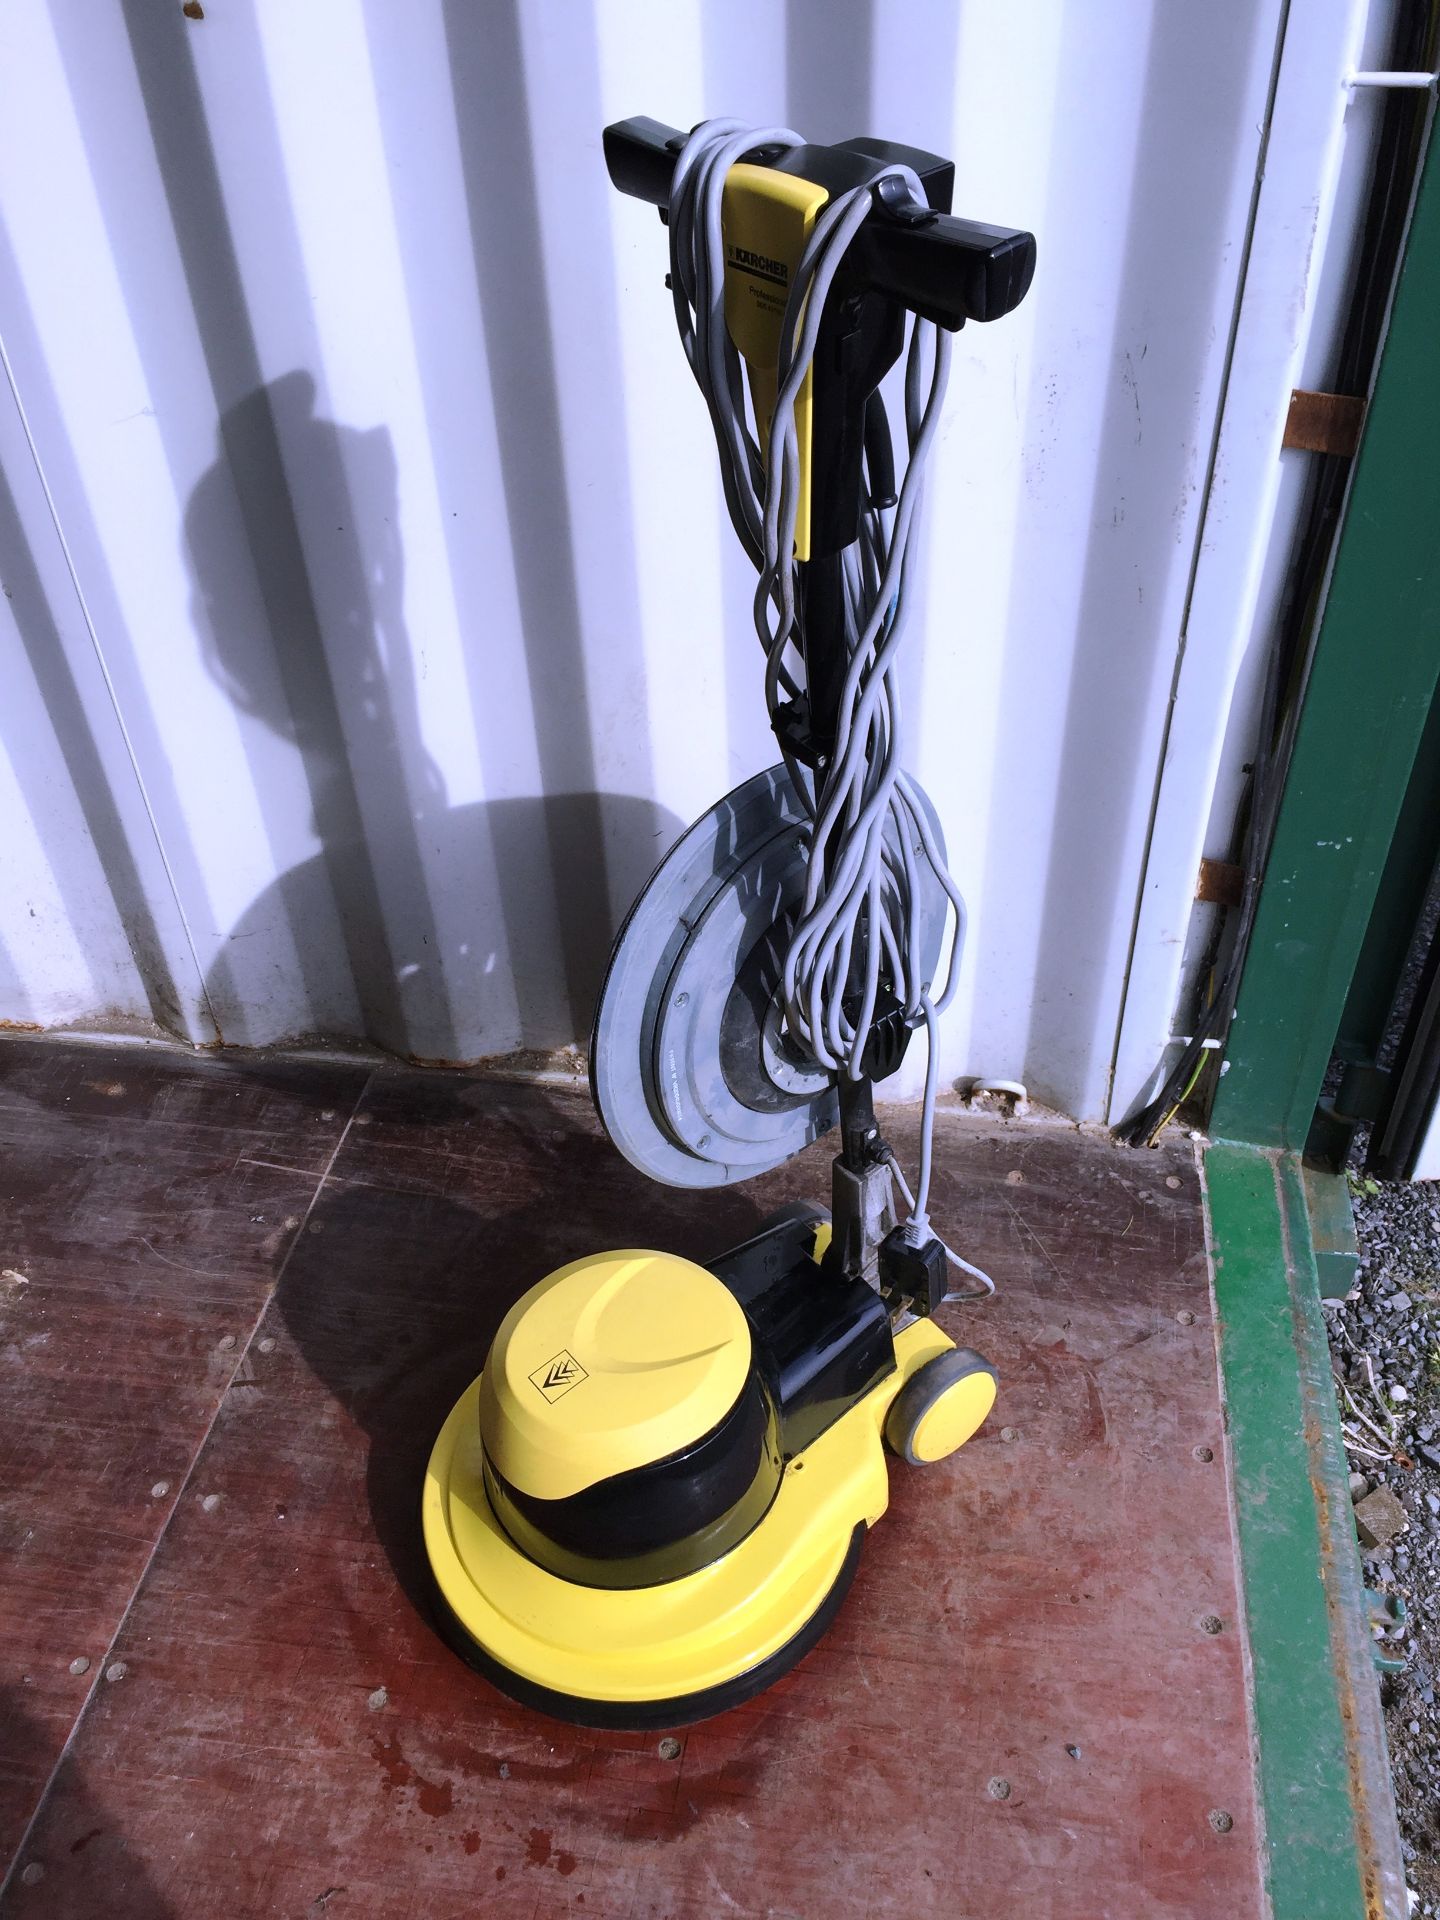 karcher professional BDS 43/150c floor buffing machine. - Image 2 of 2